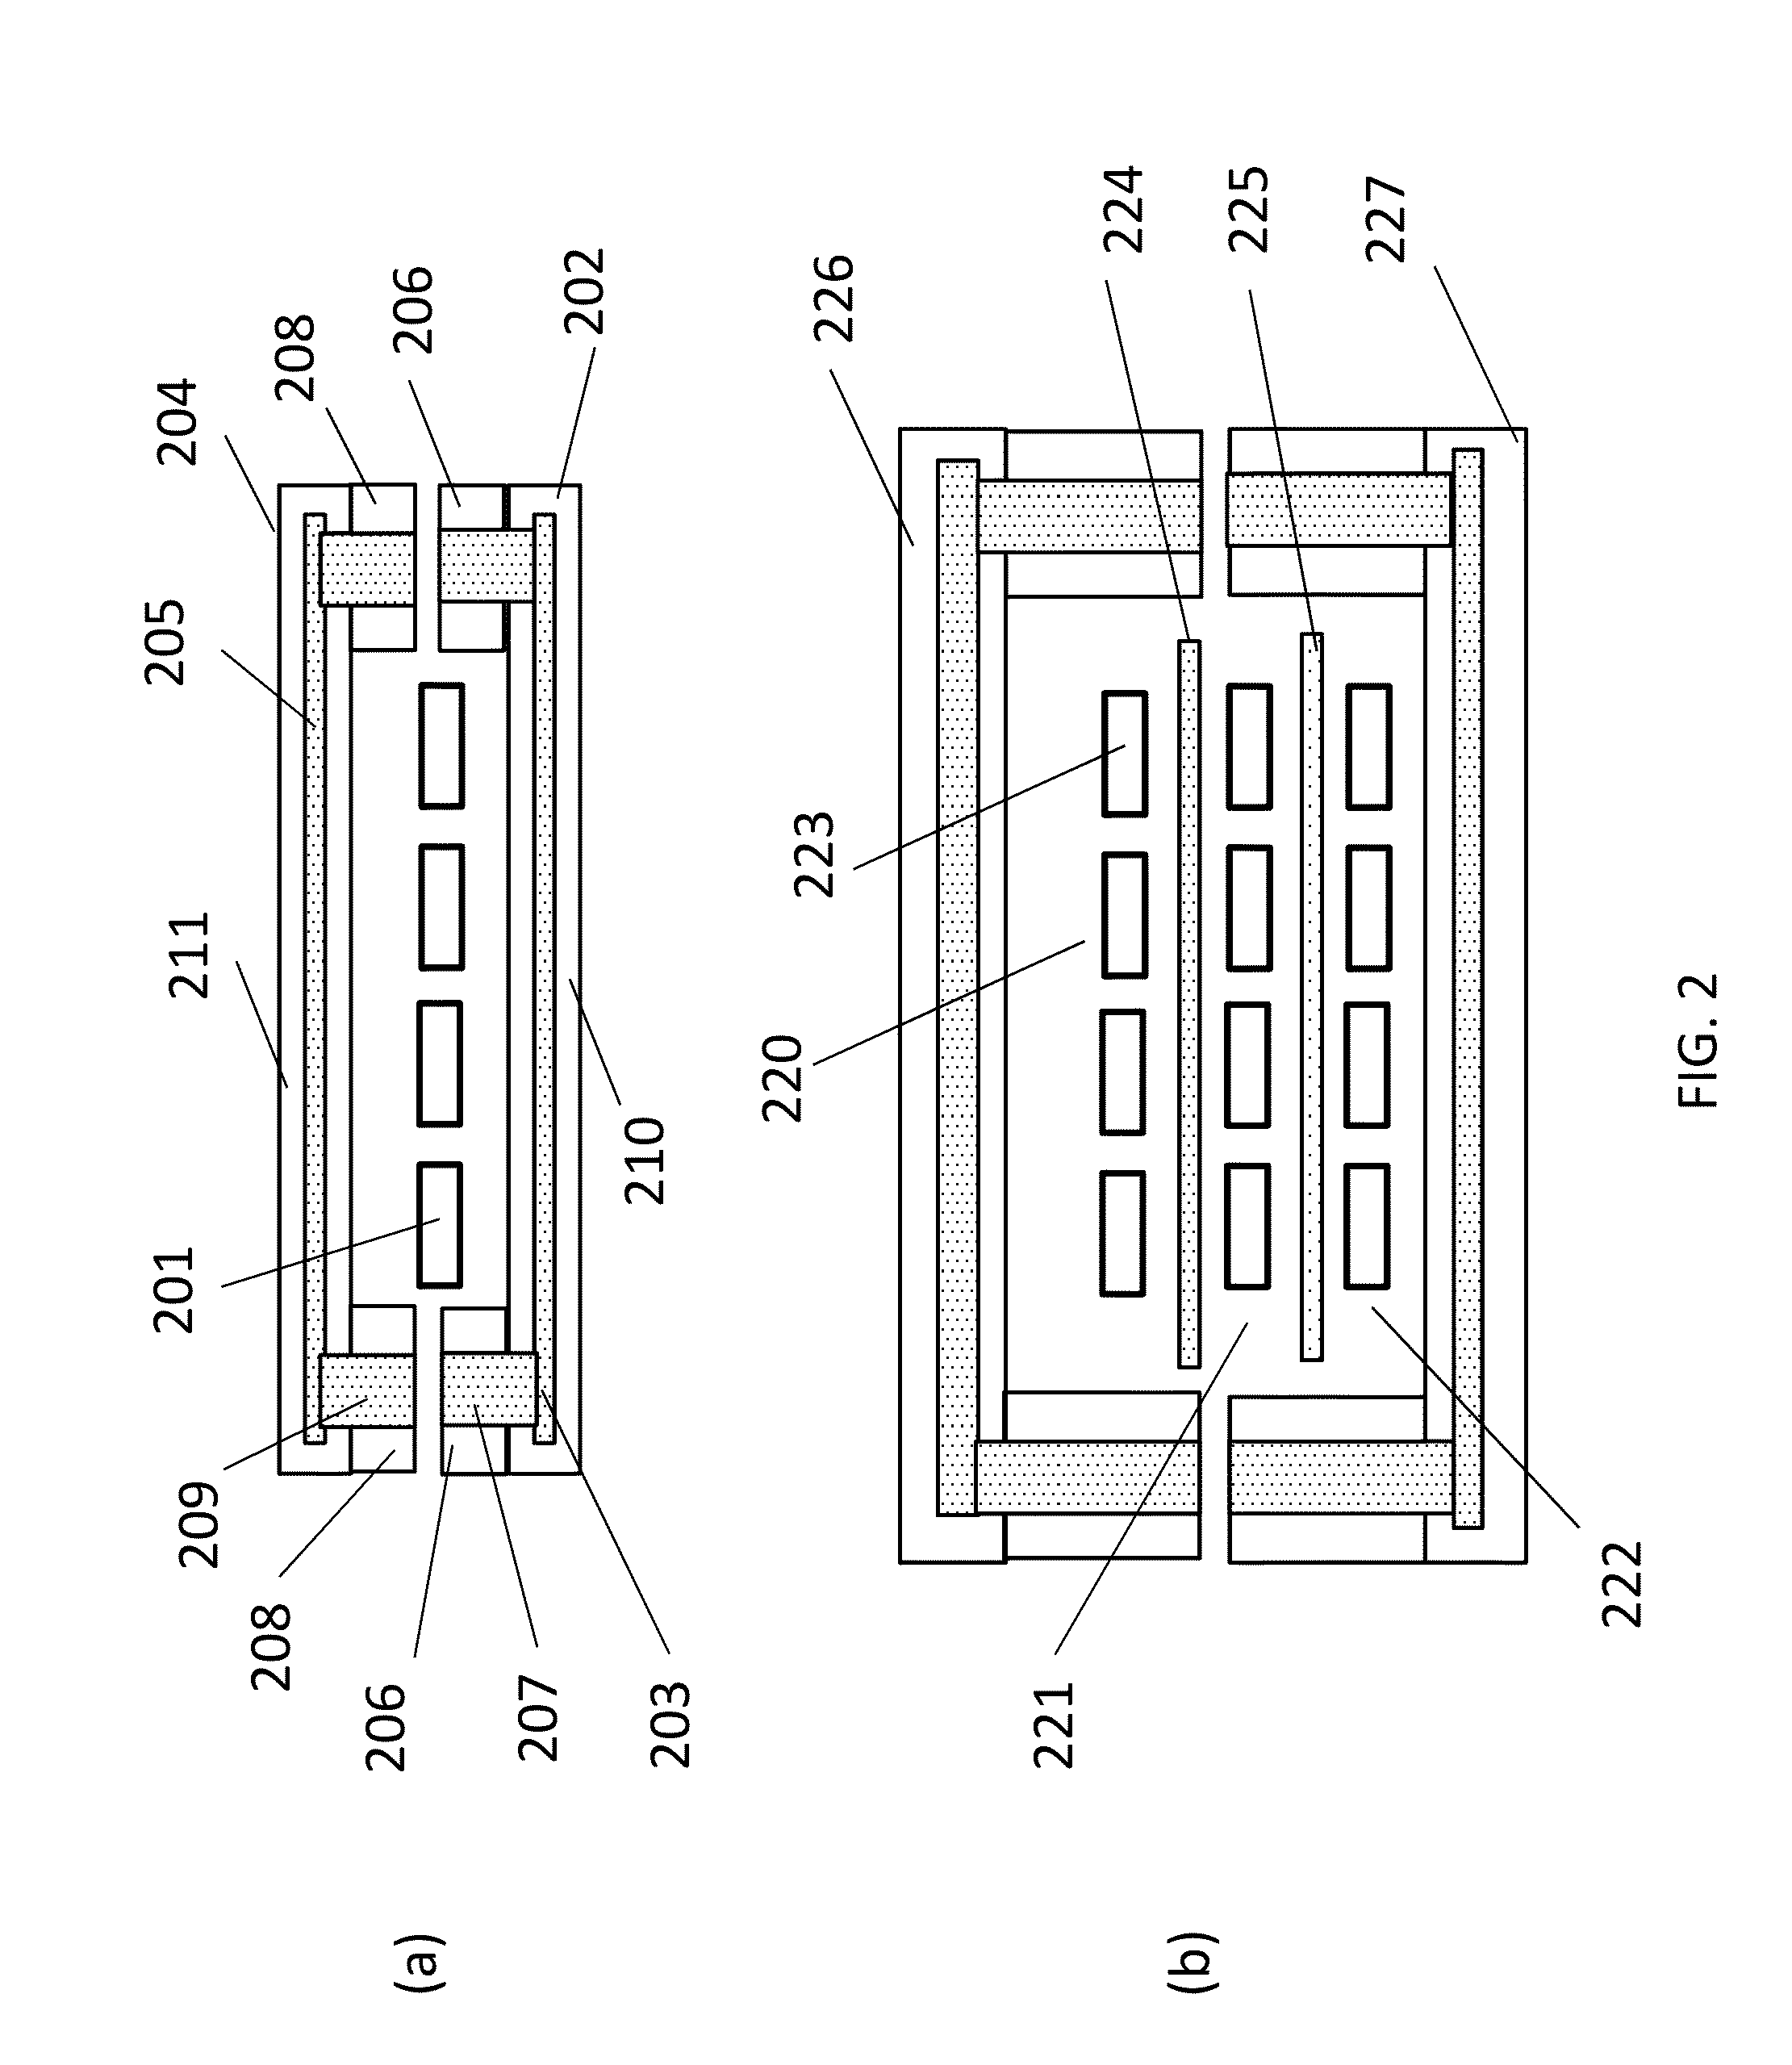 Energy Harvesting System with Multiple Cells